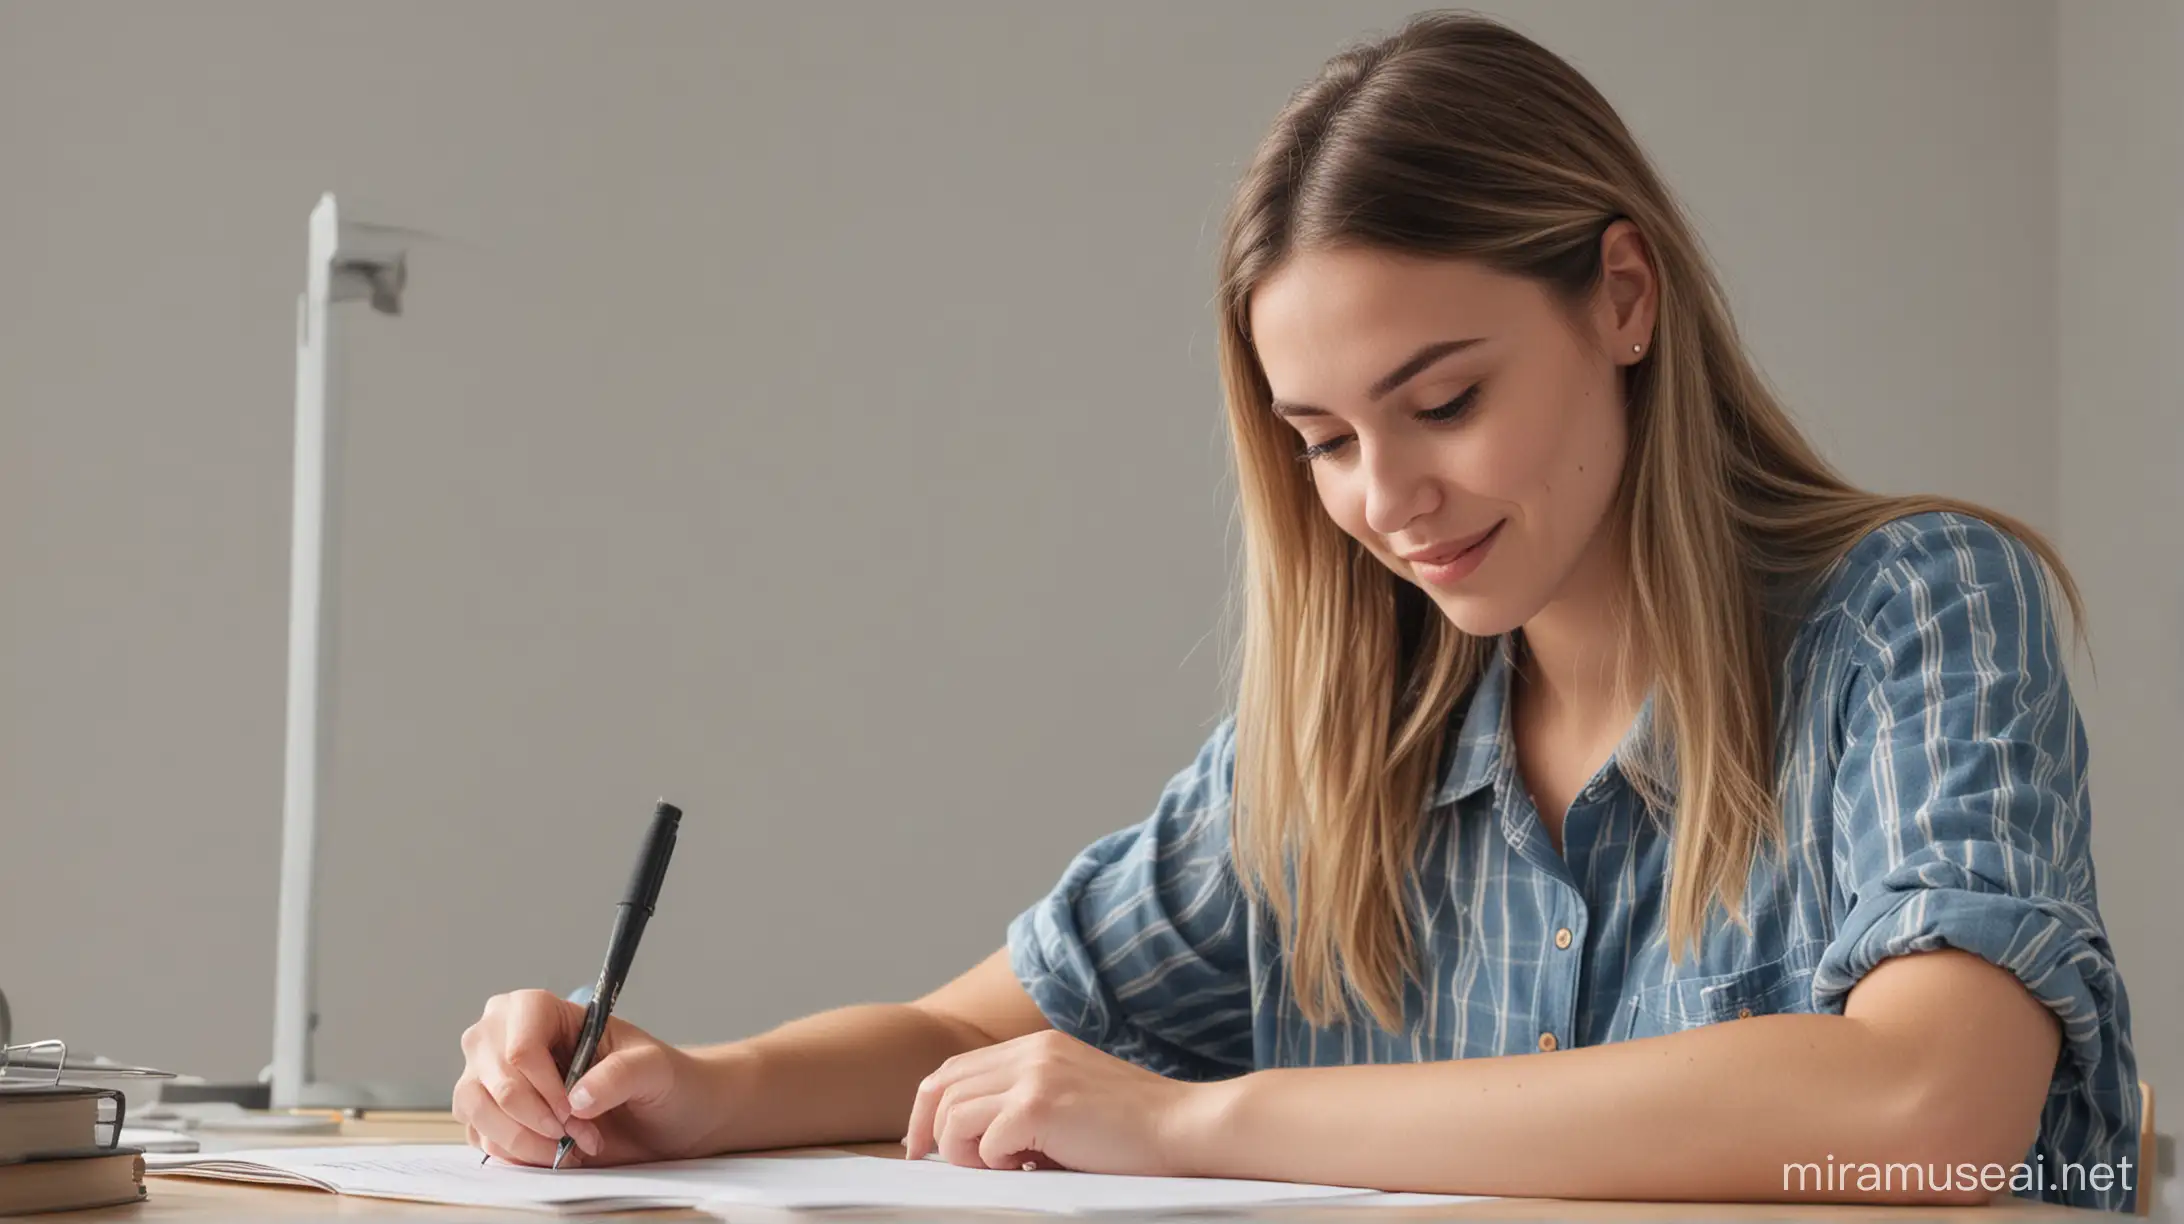 Mid20s Woman Writing at Desk with Focused Concentration